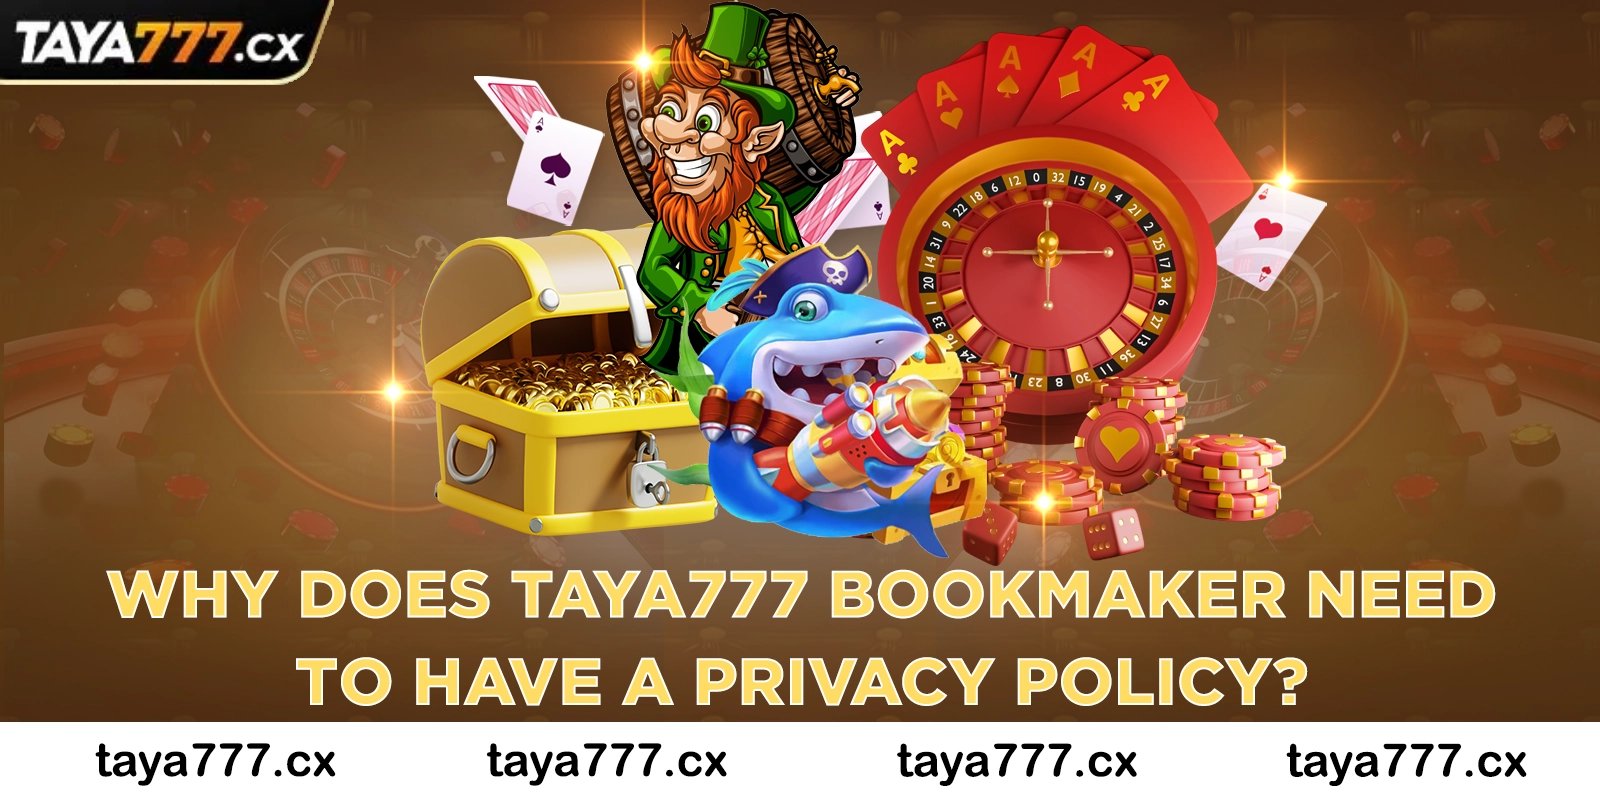 Why does Taya777 bookmaker need to have a privacy policy?